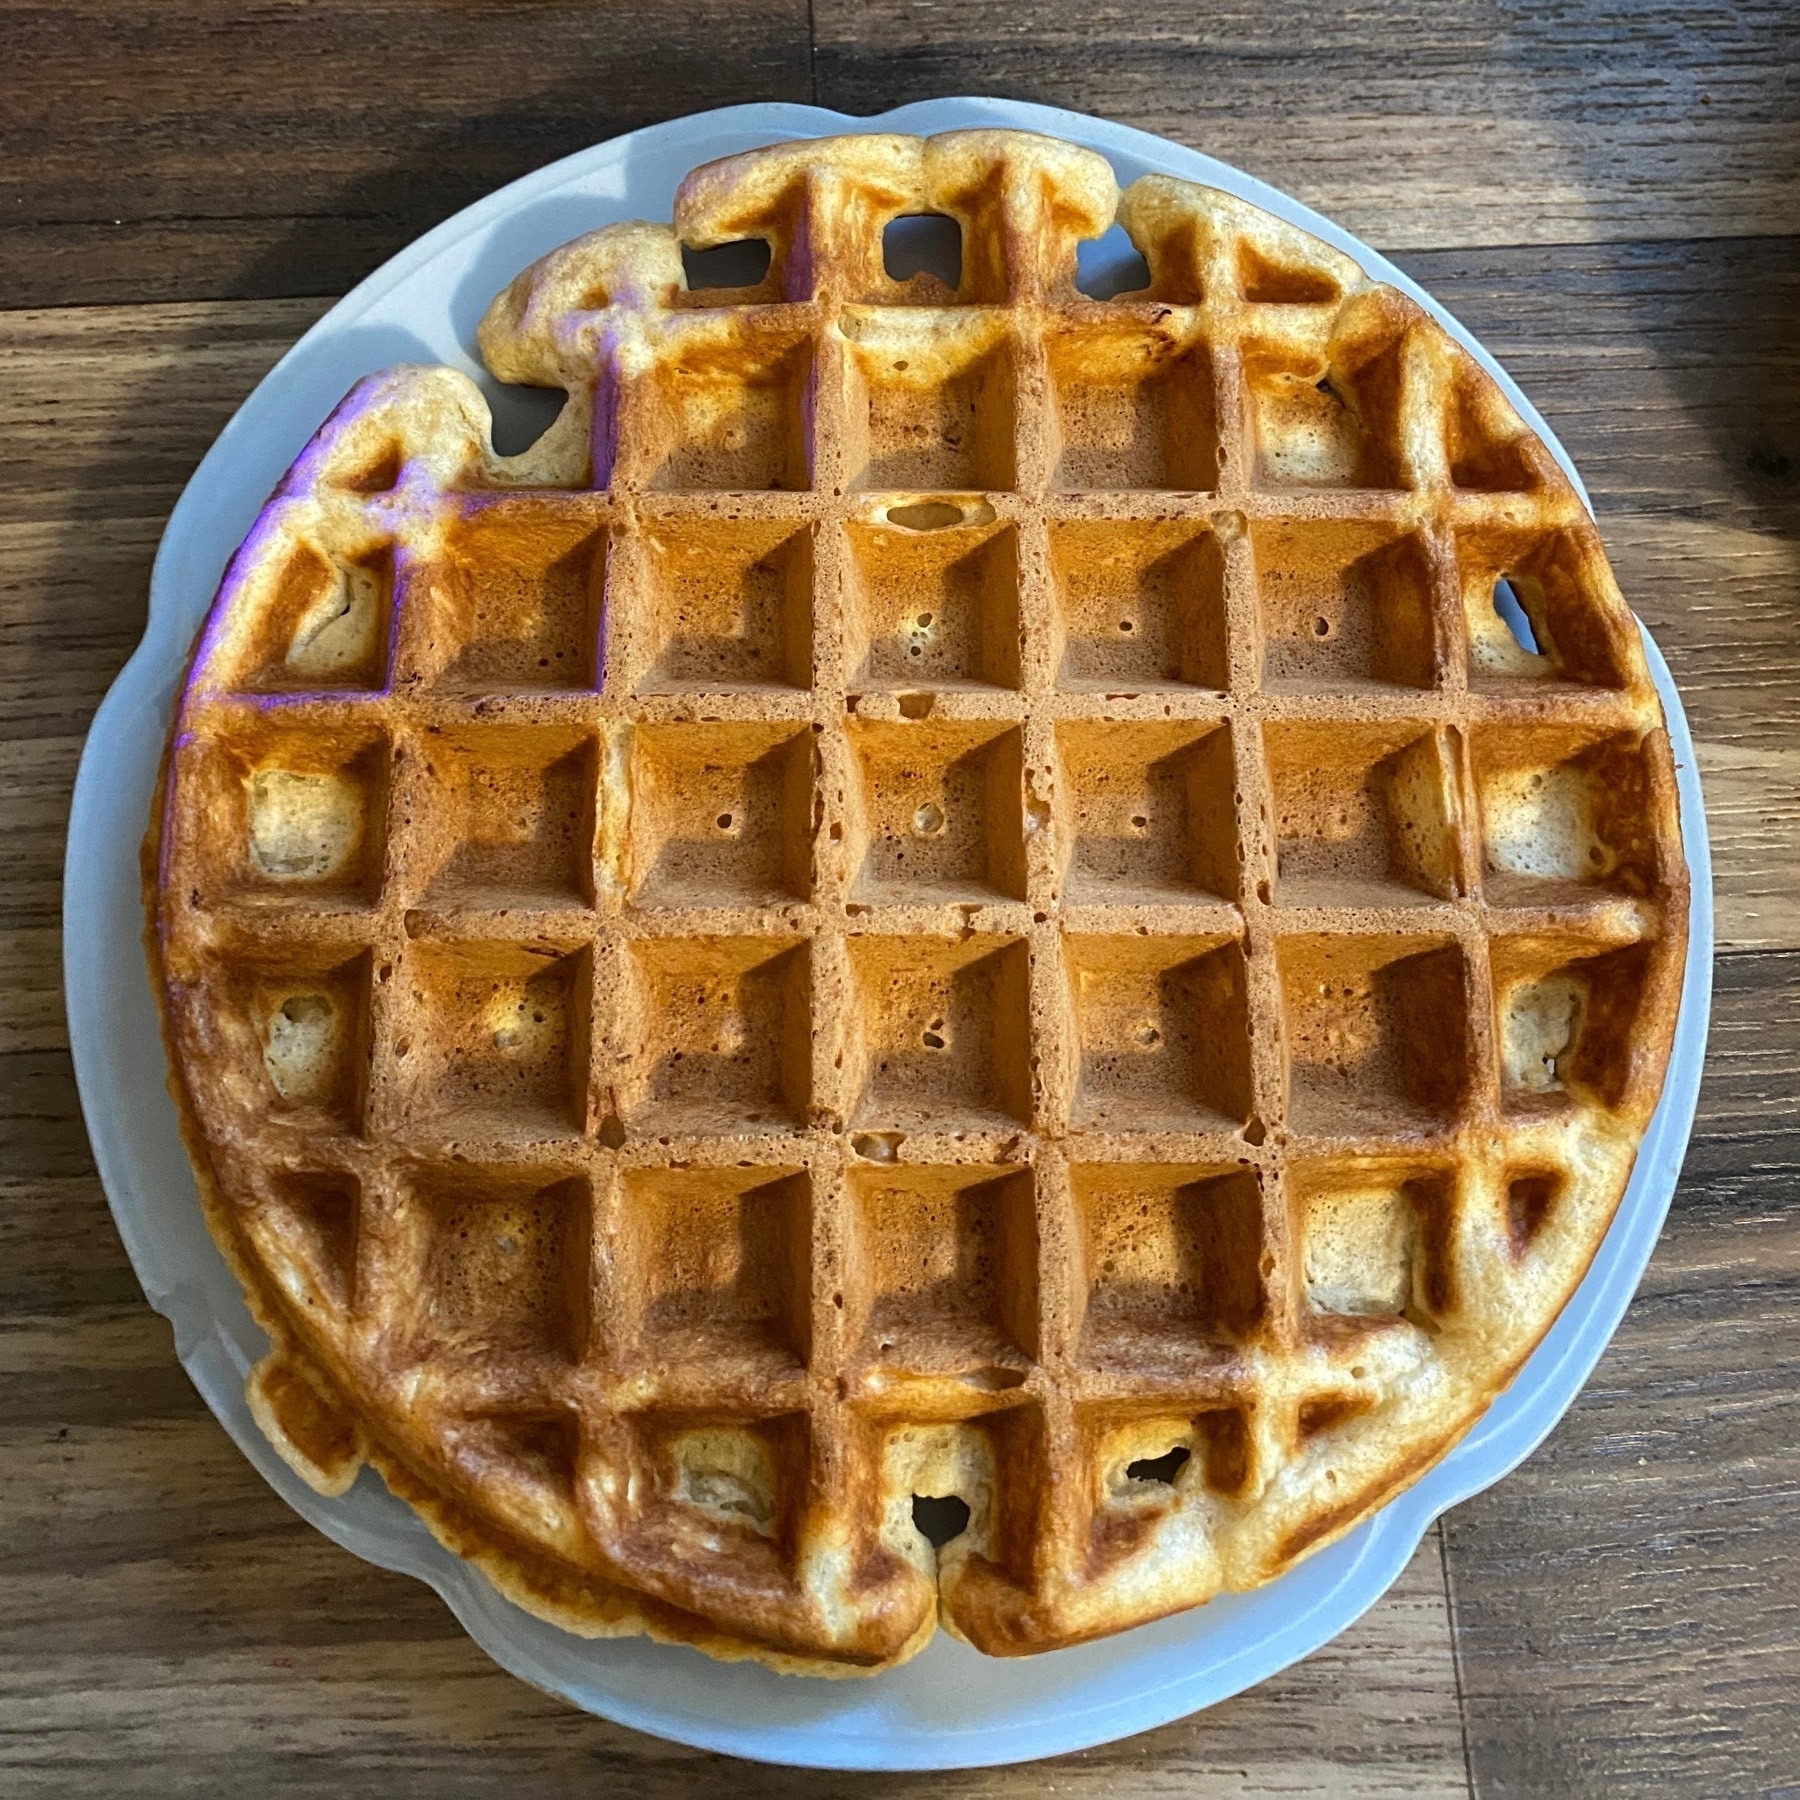 A round waffle sitting on a blue plate.